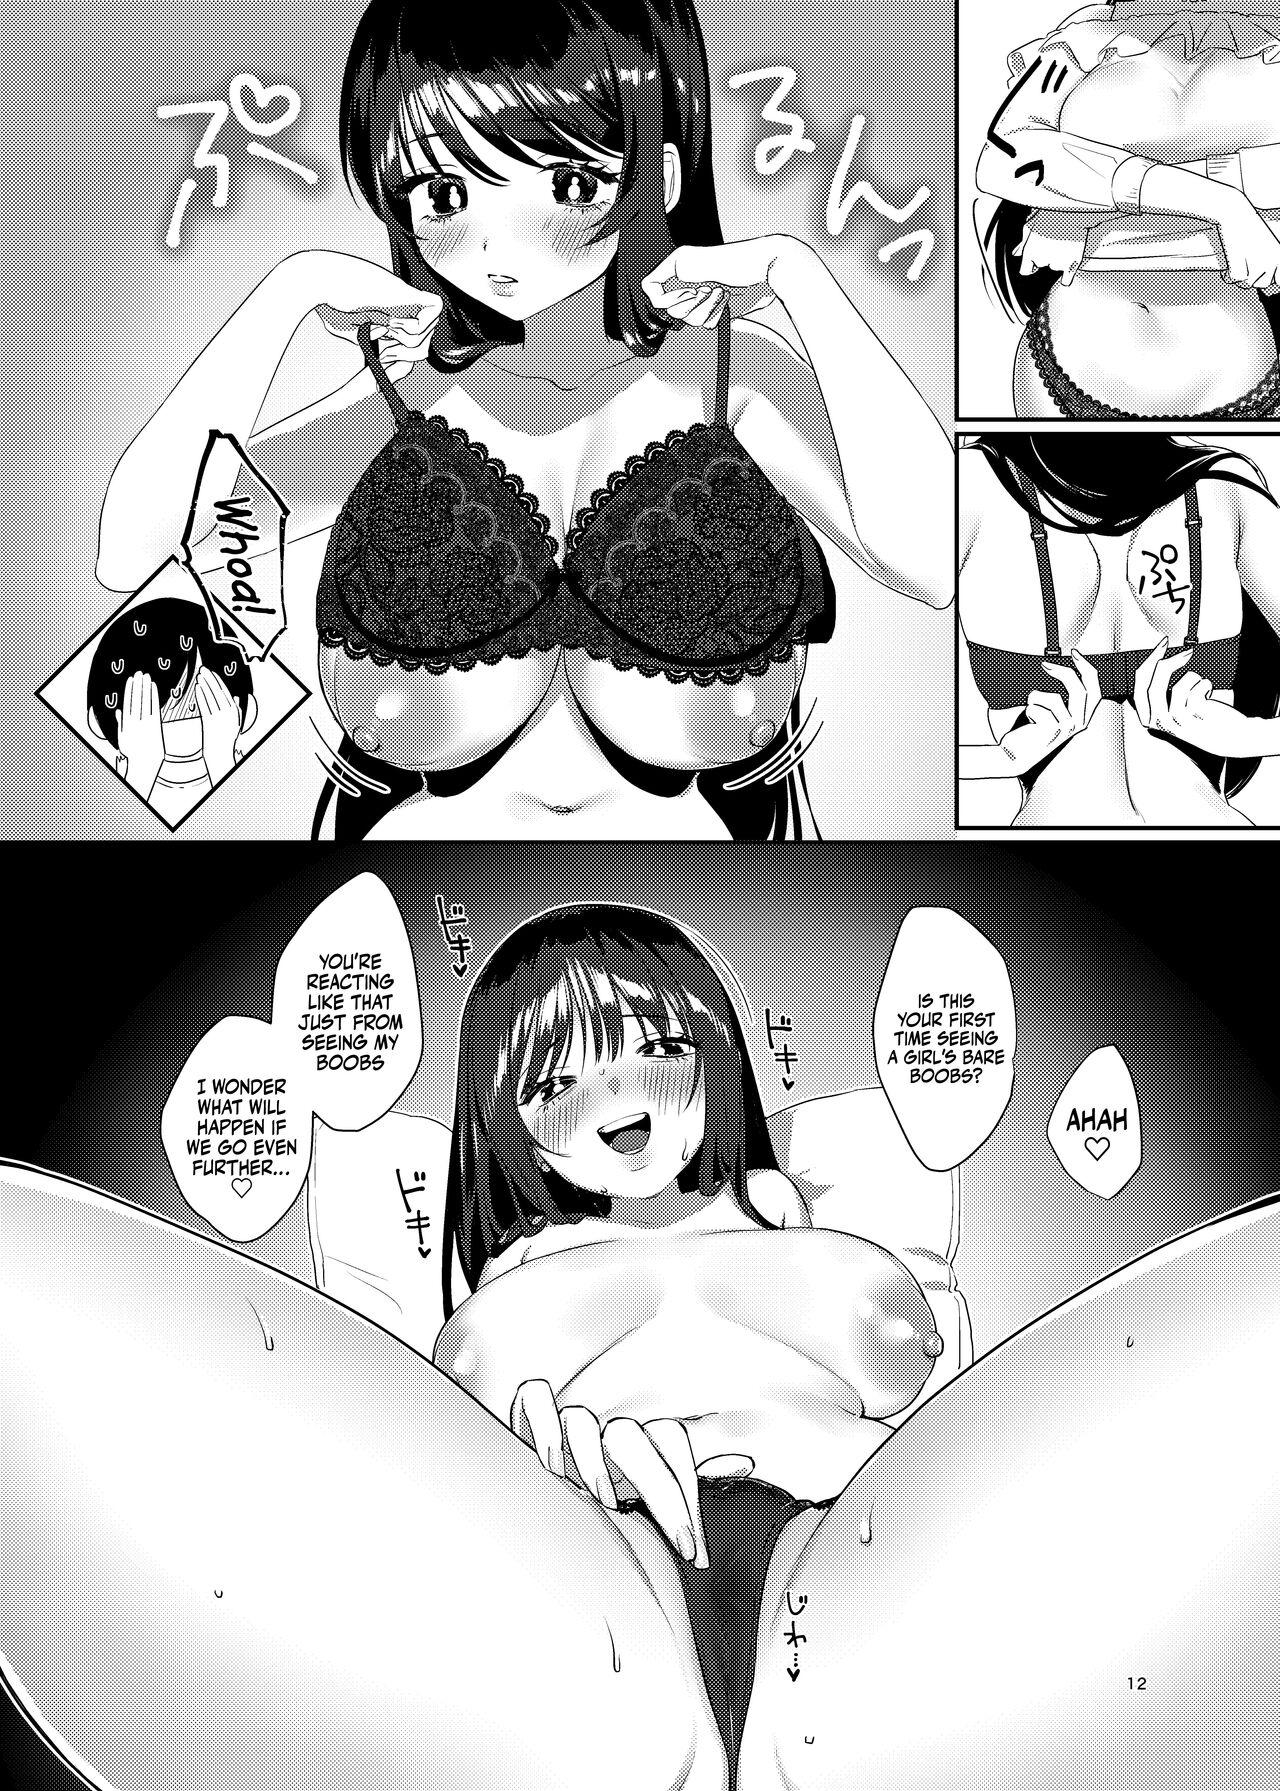 Best Blowjobs Ame, Nochi to Nari no Onee-san | Ame, Later Sister - Original Fellatio - Page 11